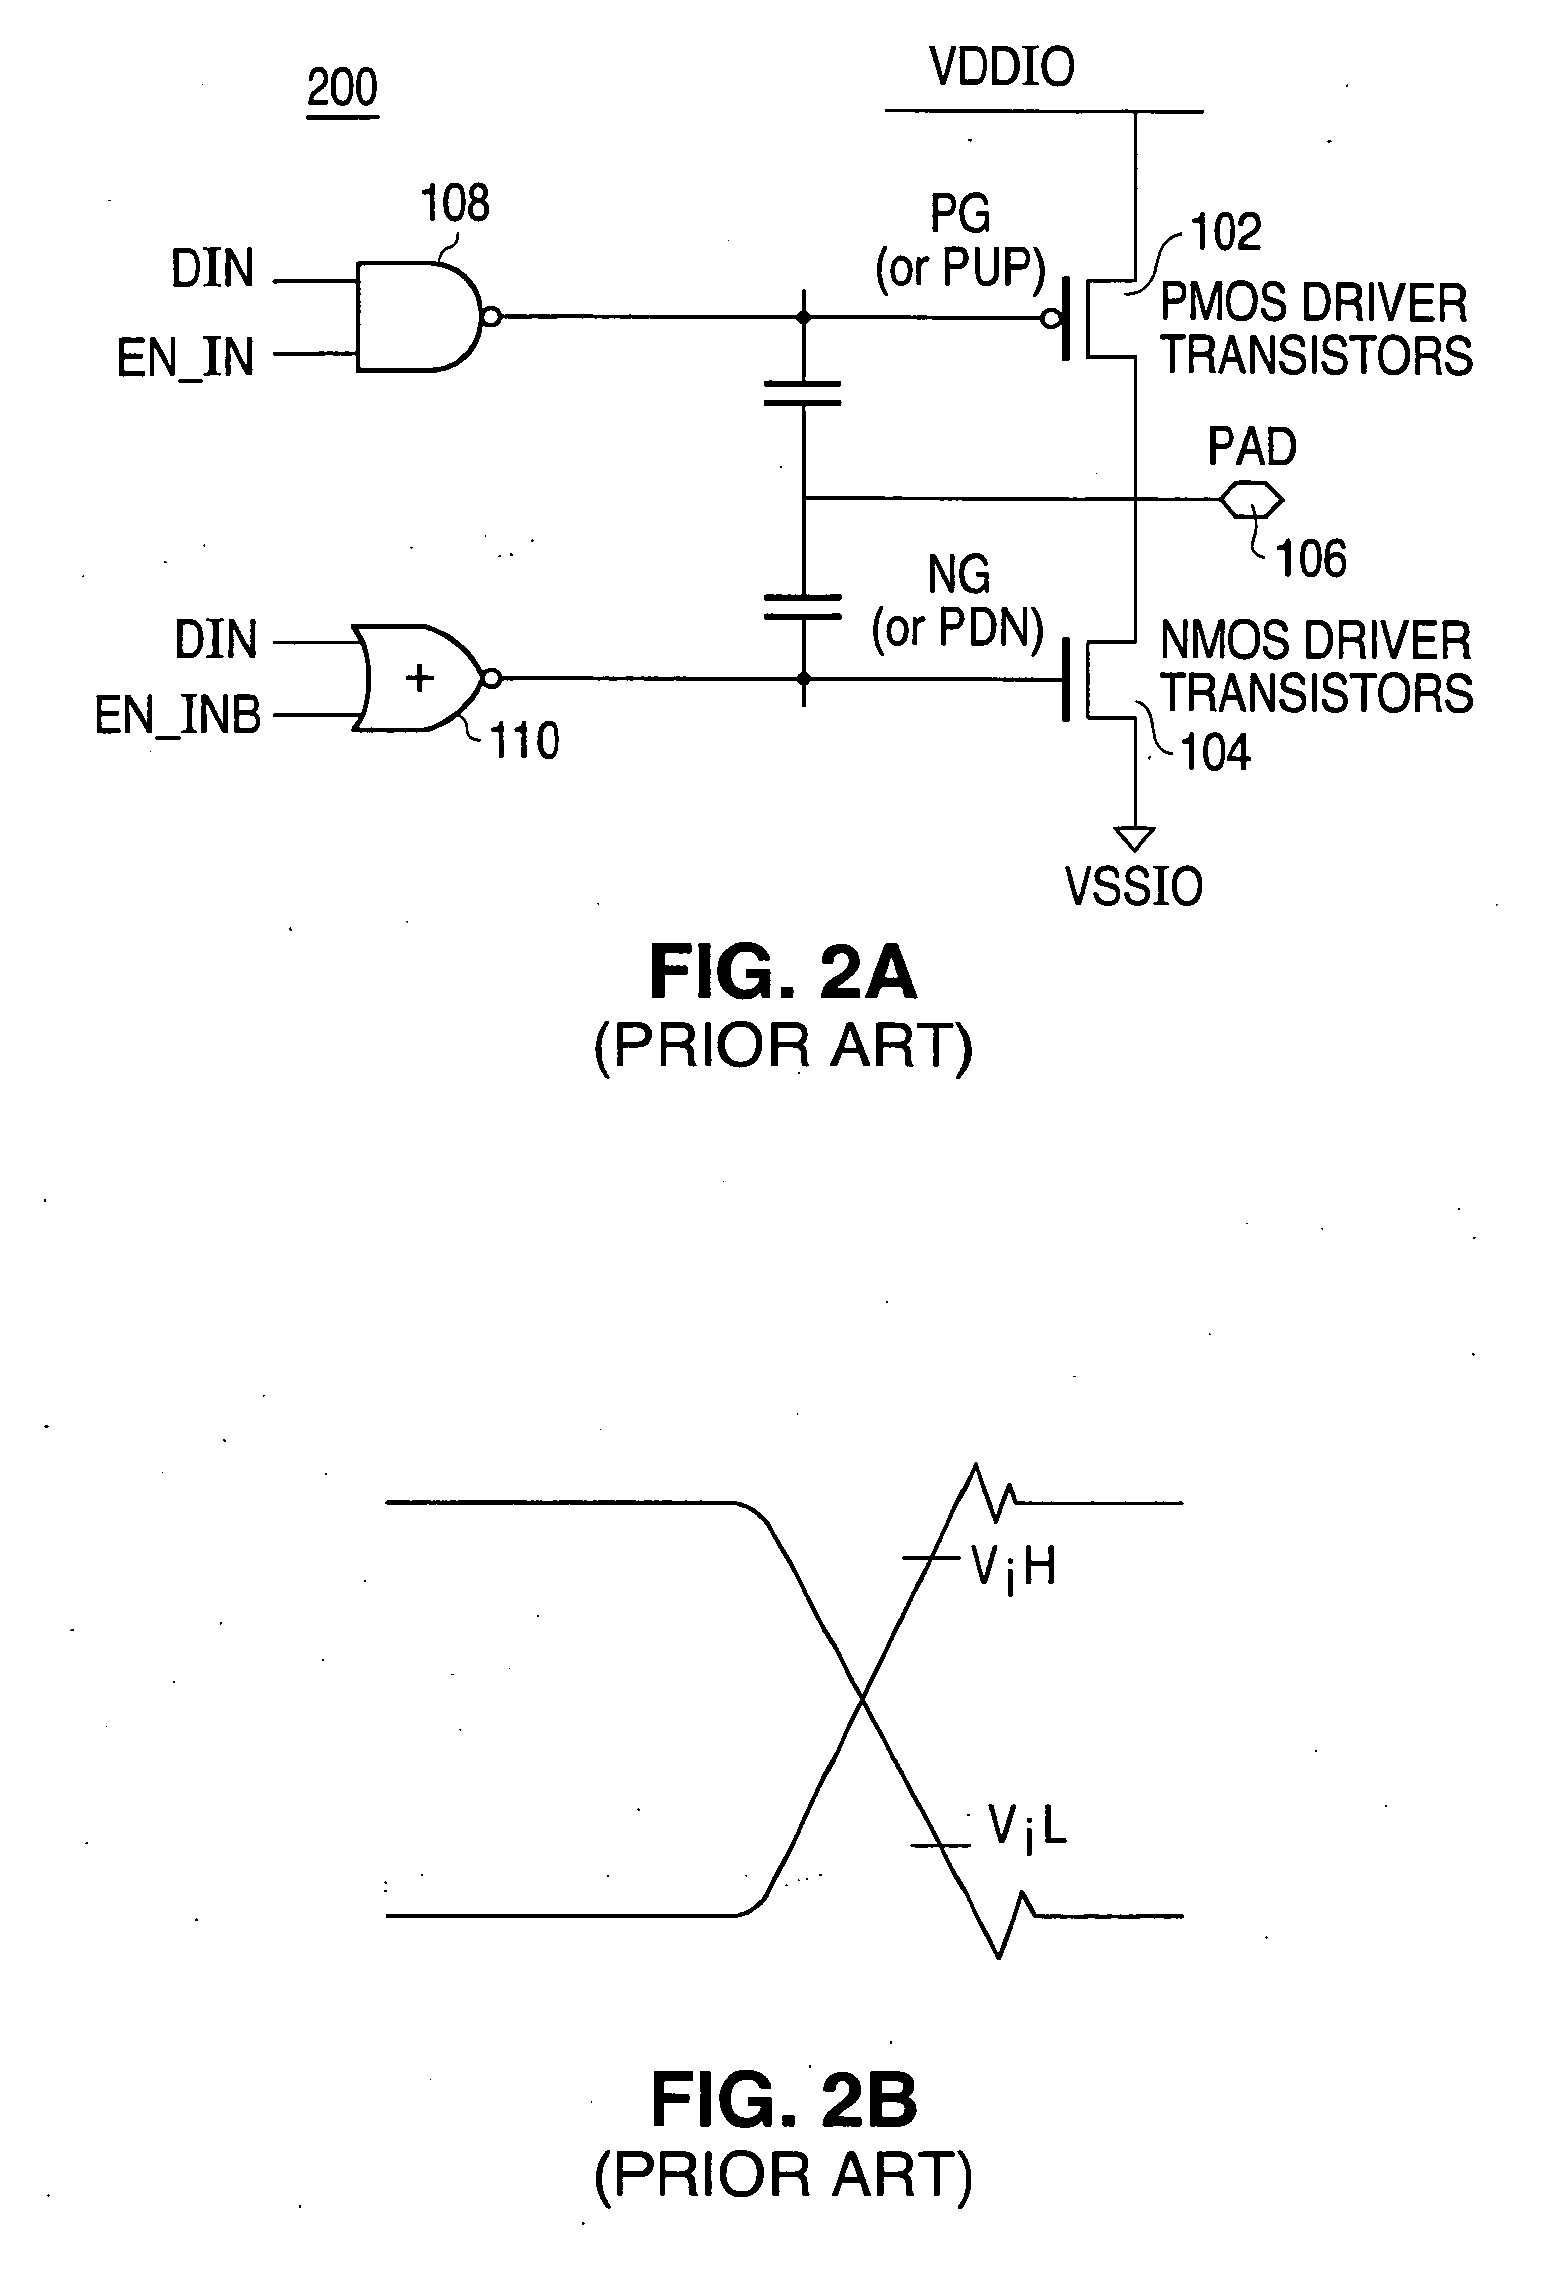 Load sense and active noise reduction for I/O circuit